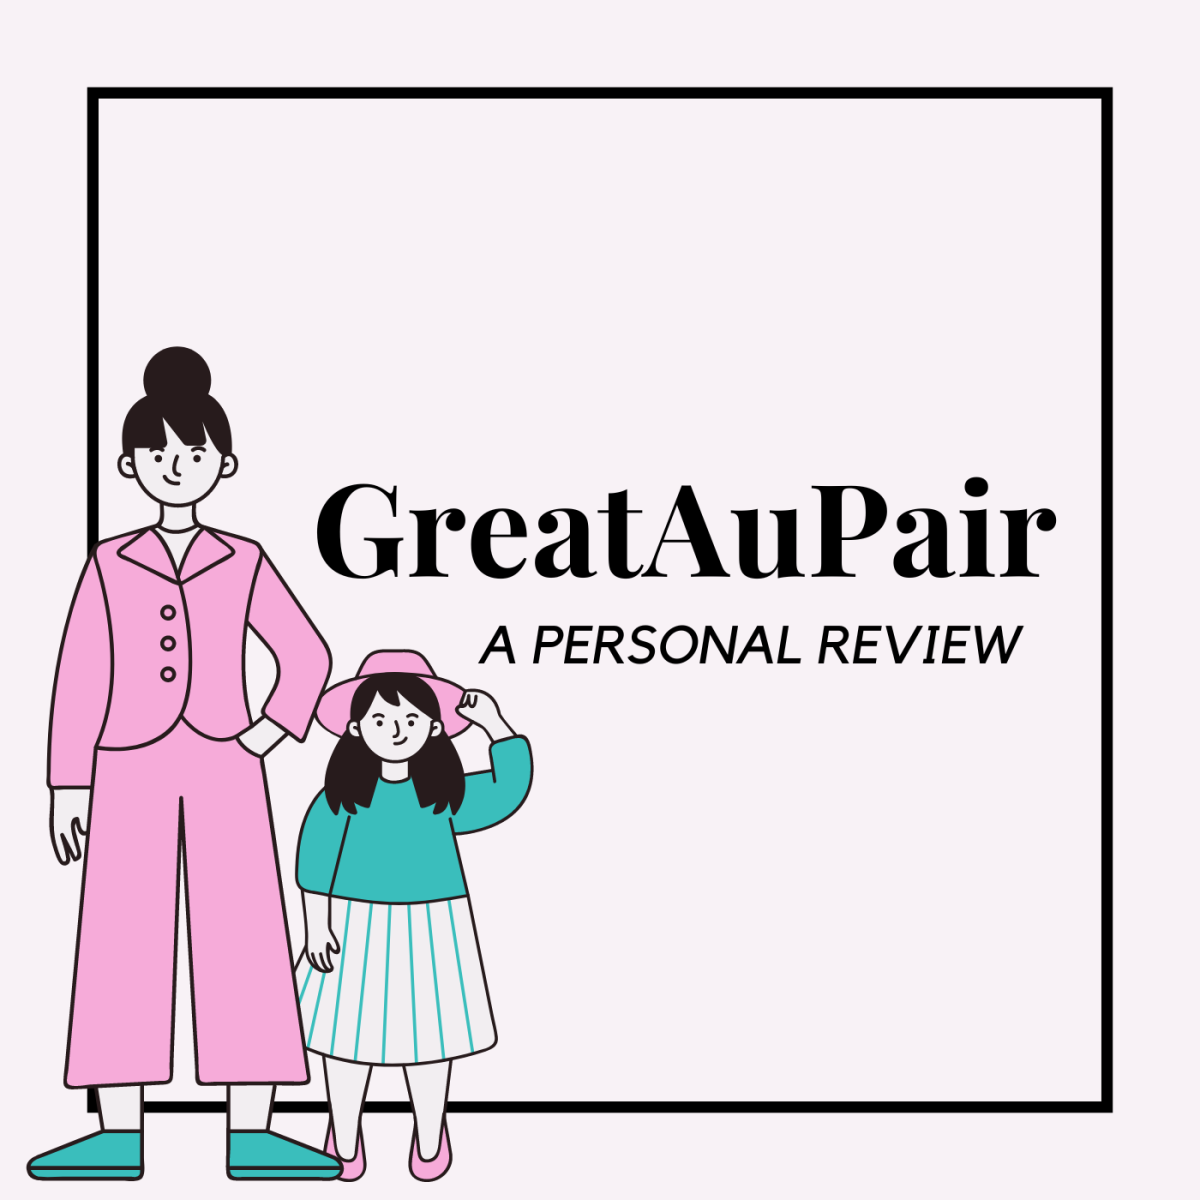 Is GreatAuPair actually a good service?